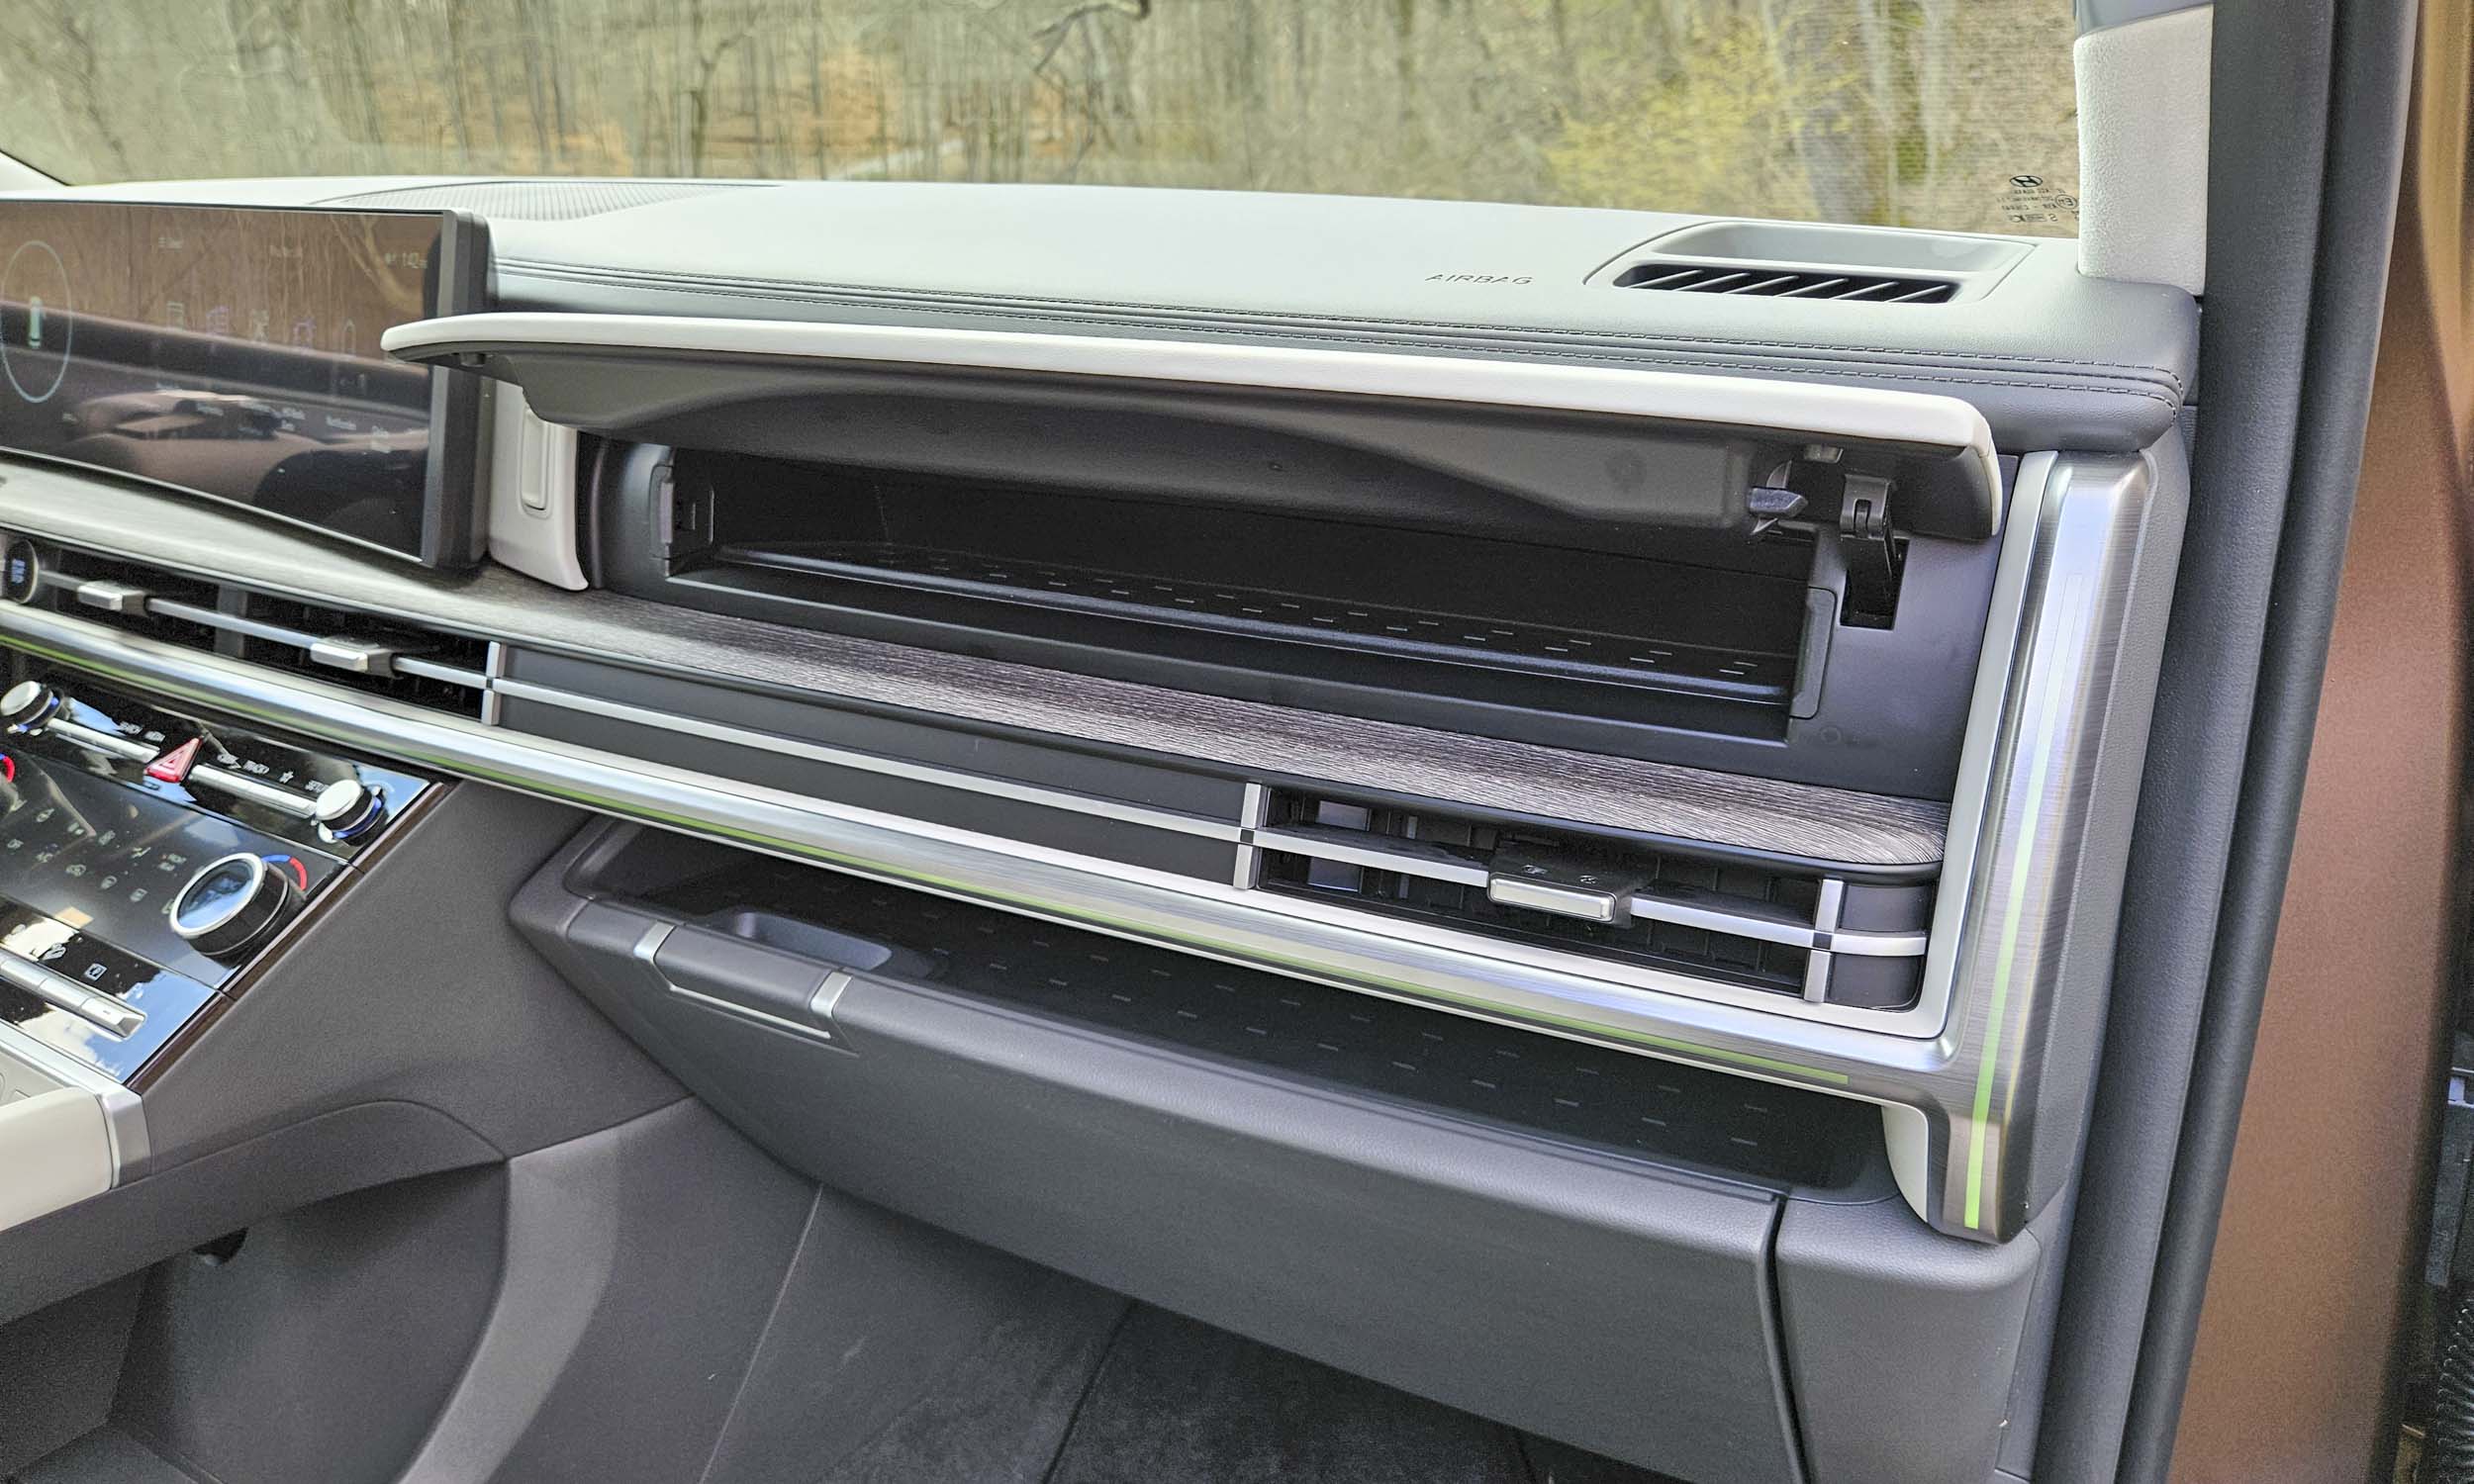 <p>          A unique feature of the updated Santa Fe is the available second compartment above the typical glove box. Not only does this space offer additional storage, but it also features a UV-C sterilization system. After about ten minutes, items placed in the compartment will be free of bacteria and viruses. But you’ll still have to clean the fingerprints off the screen.         </p>